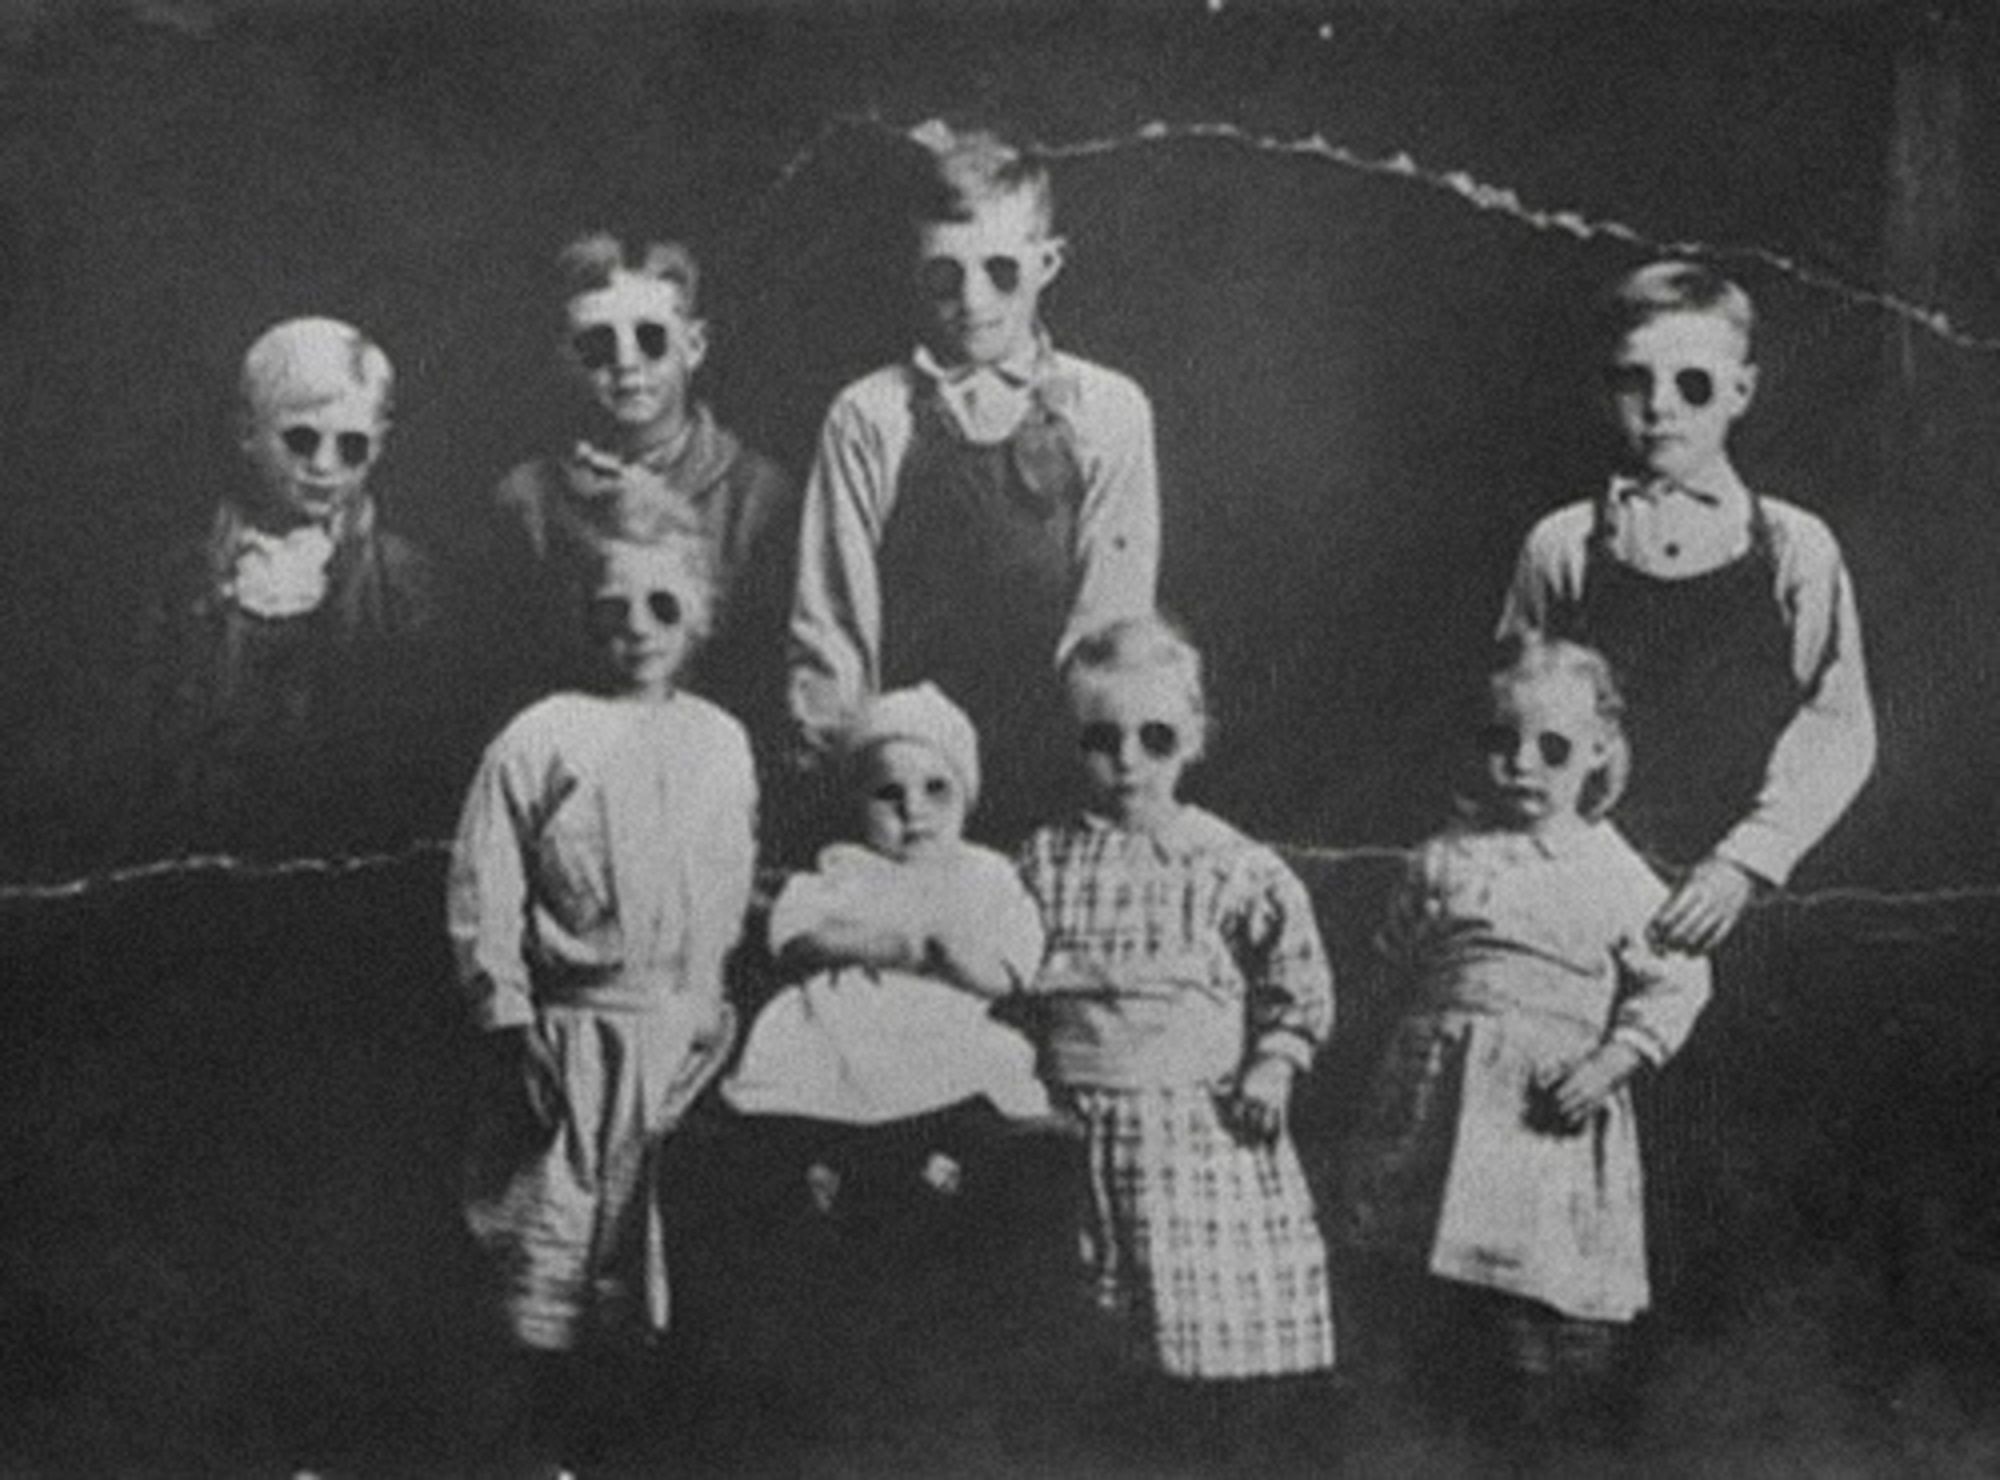 -http://static3.therichestimages.com/cdn/568/420/90/cw/wp-content/uploads/2014/10/Old-Creepy-Photos-Black-Eyed-Kids.jpg